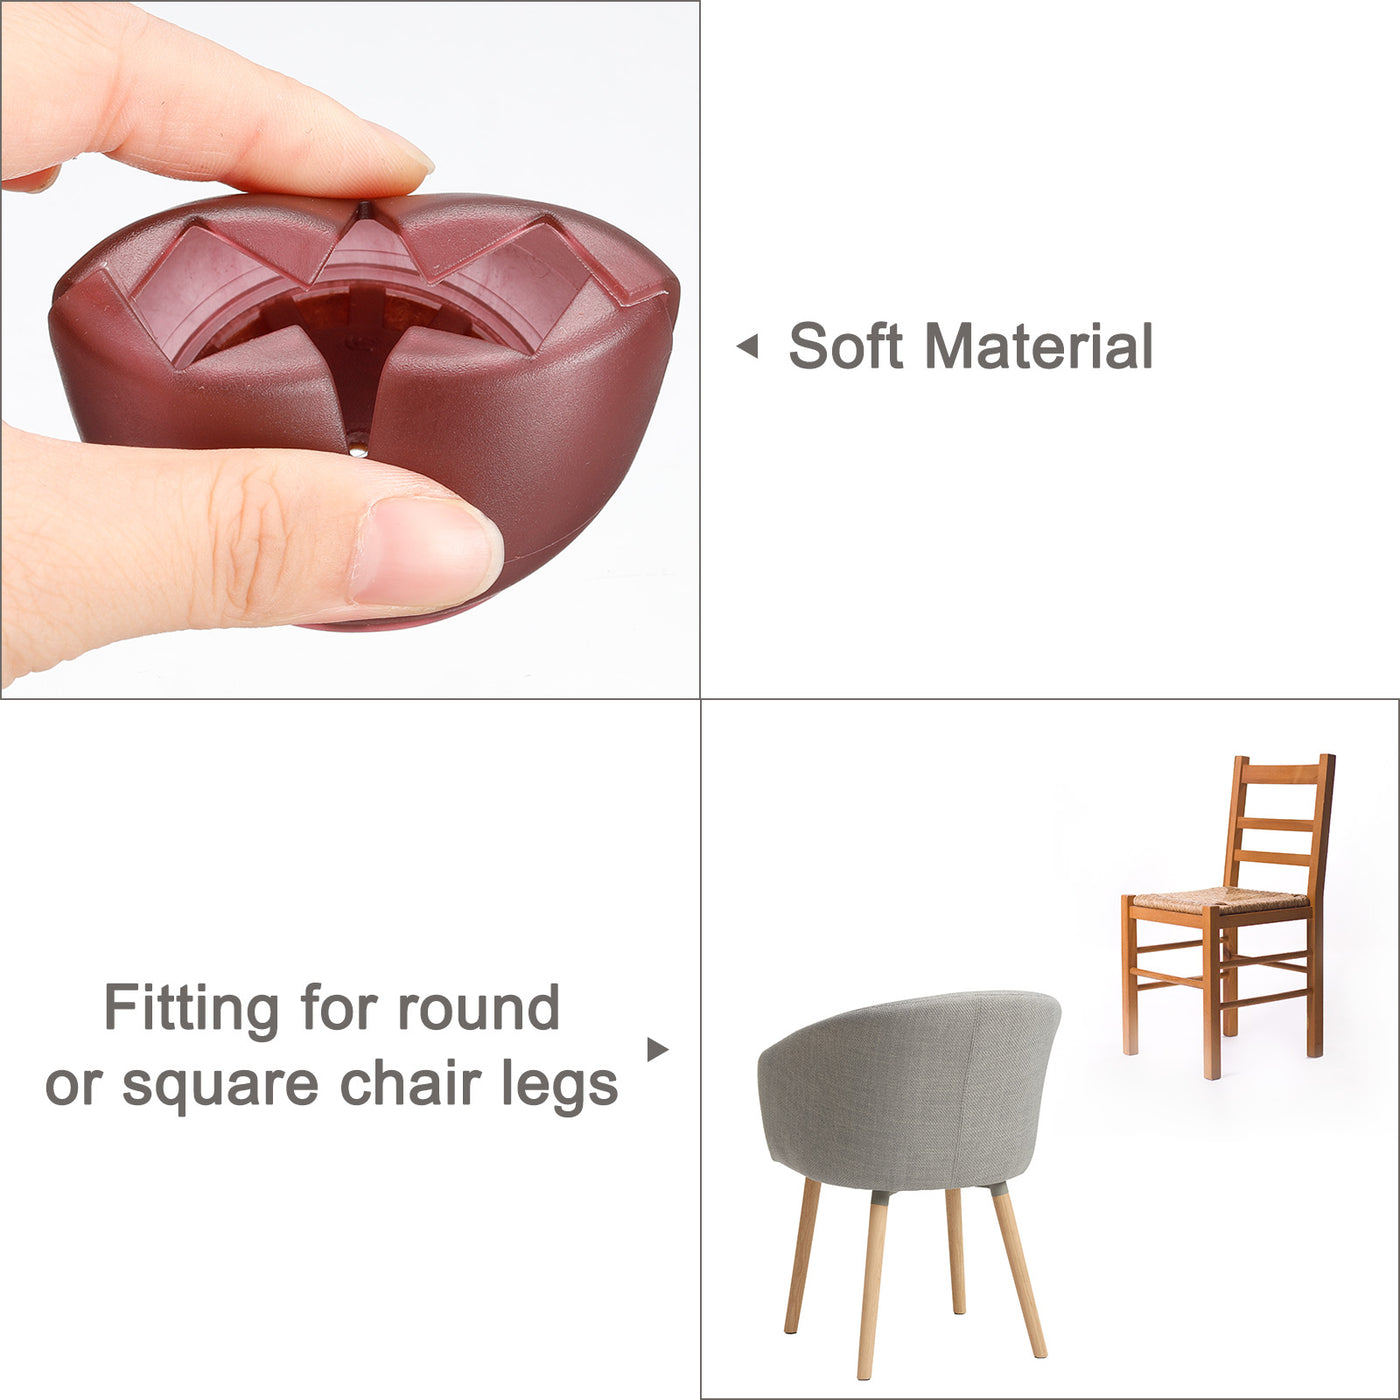 uxcell Uxcell Chair Leg Floor Protectors, 8Pcs 30mm(1.18") Silicone & Felt Chair Leg Cover Caps for Hardwood Floors (Wine Red)